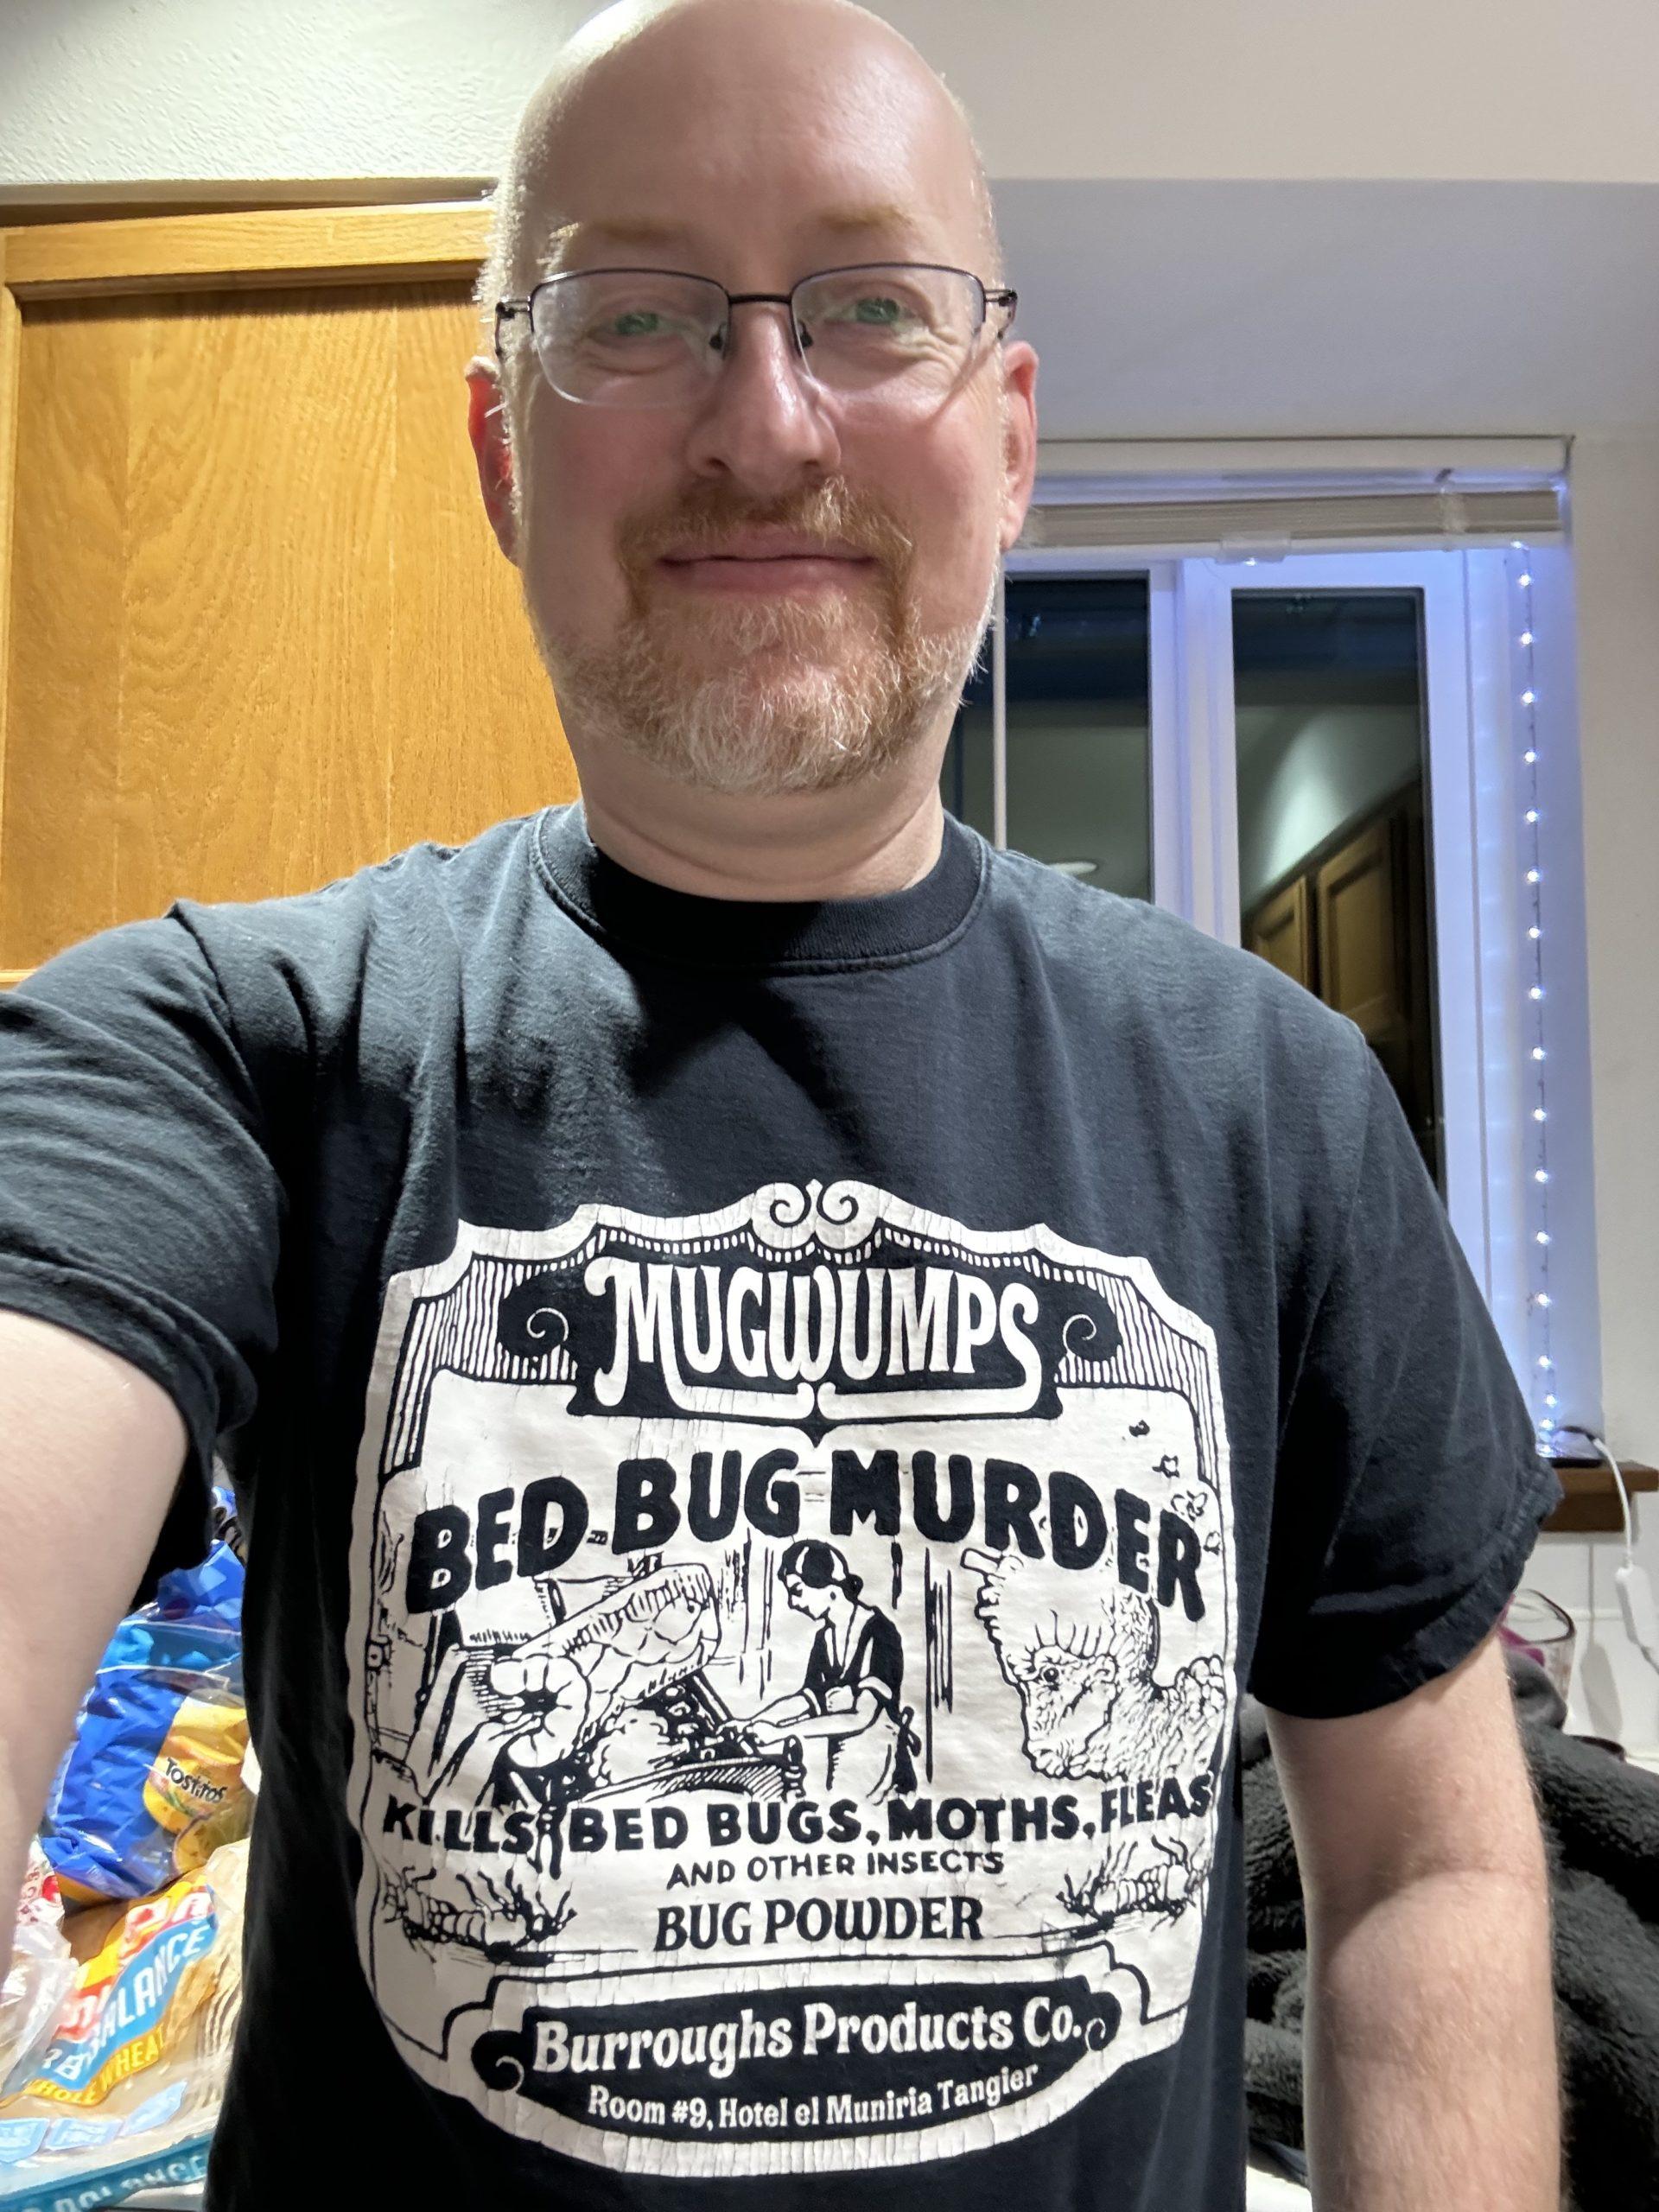 Me wearing a black t-shirt with a design that looks like an old-time label that says: Mugwumps Bed Bug Murder Bug Powder. Kills bed bugs, moths, fleas, and other insects. Burroughs Products Co. Room #9, Hotel el Muniria Tangier.